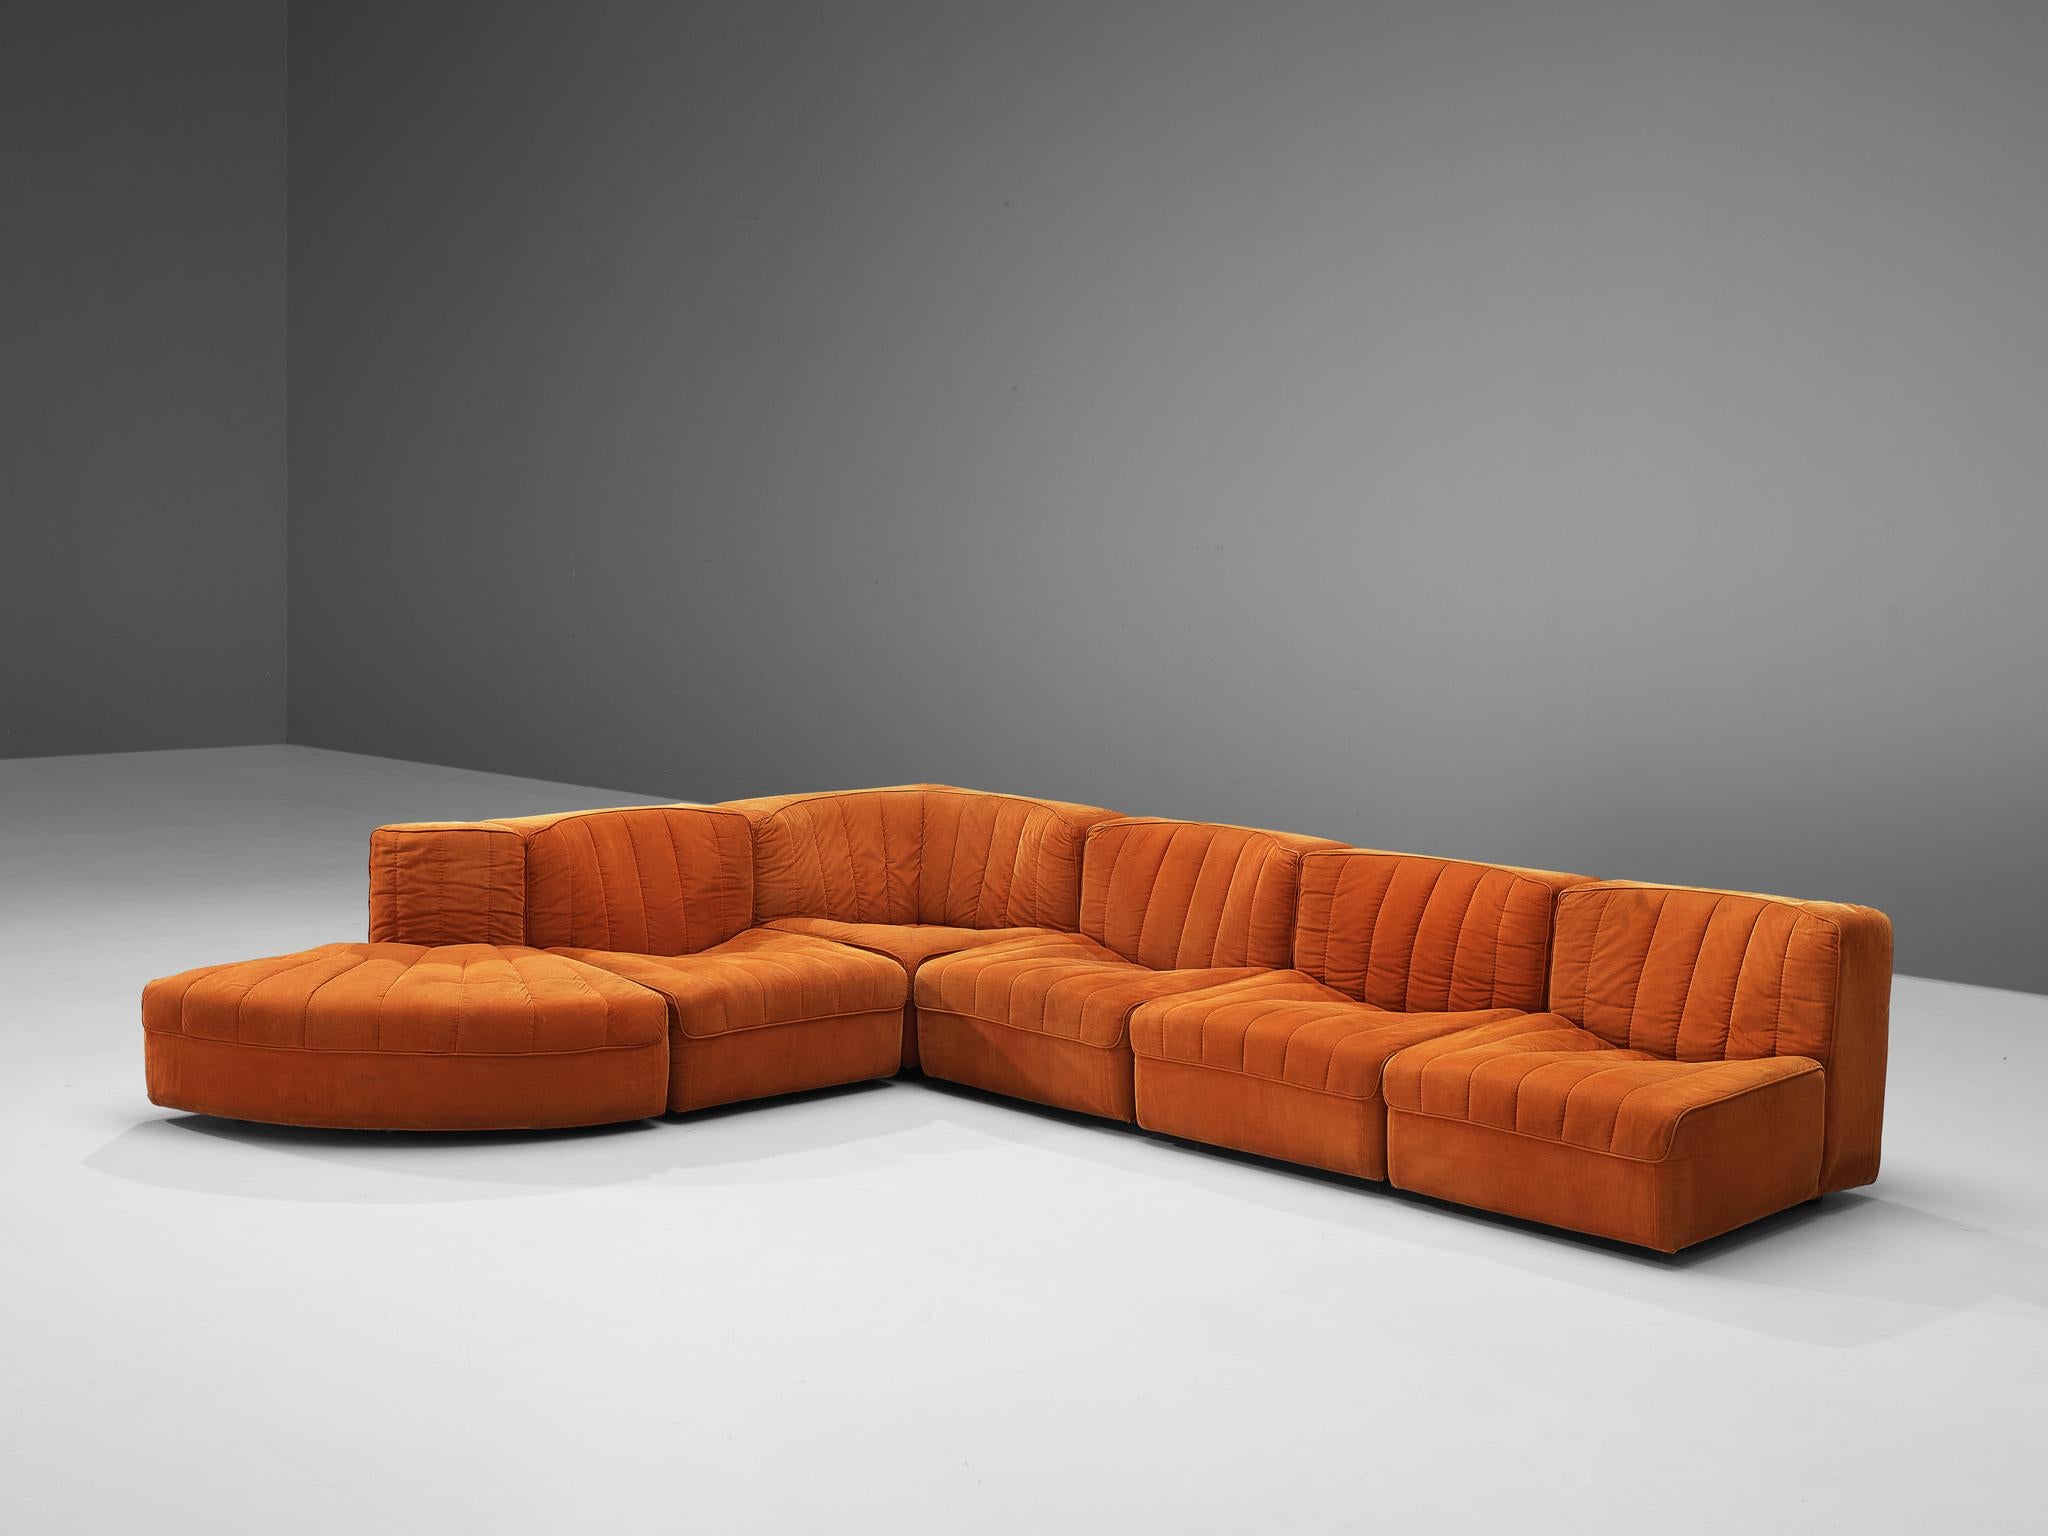 Tito Agnoli for Arflex, modular sofa model '9000', orange fabric upholstery, Italy, 1970s

The sectional elements this sofa can be used freely and apart from one another. The backs and armrests are decided with vertical sections. There is one corner